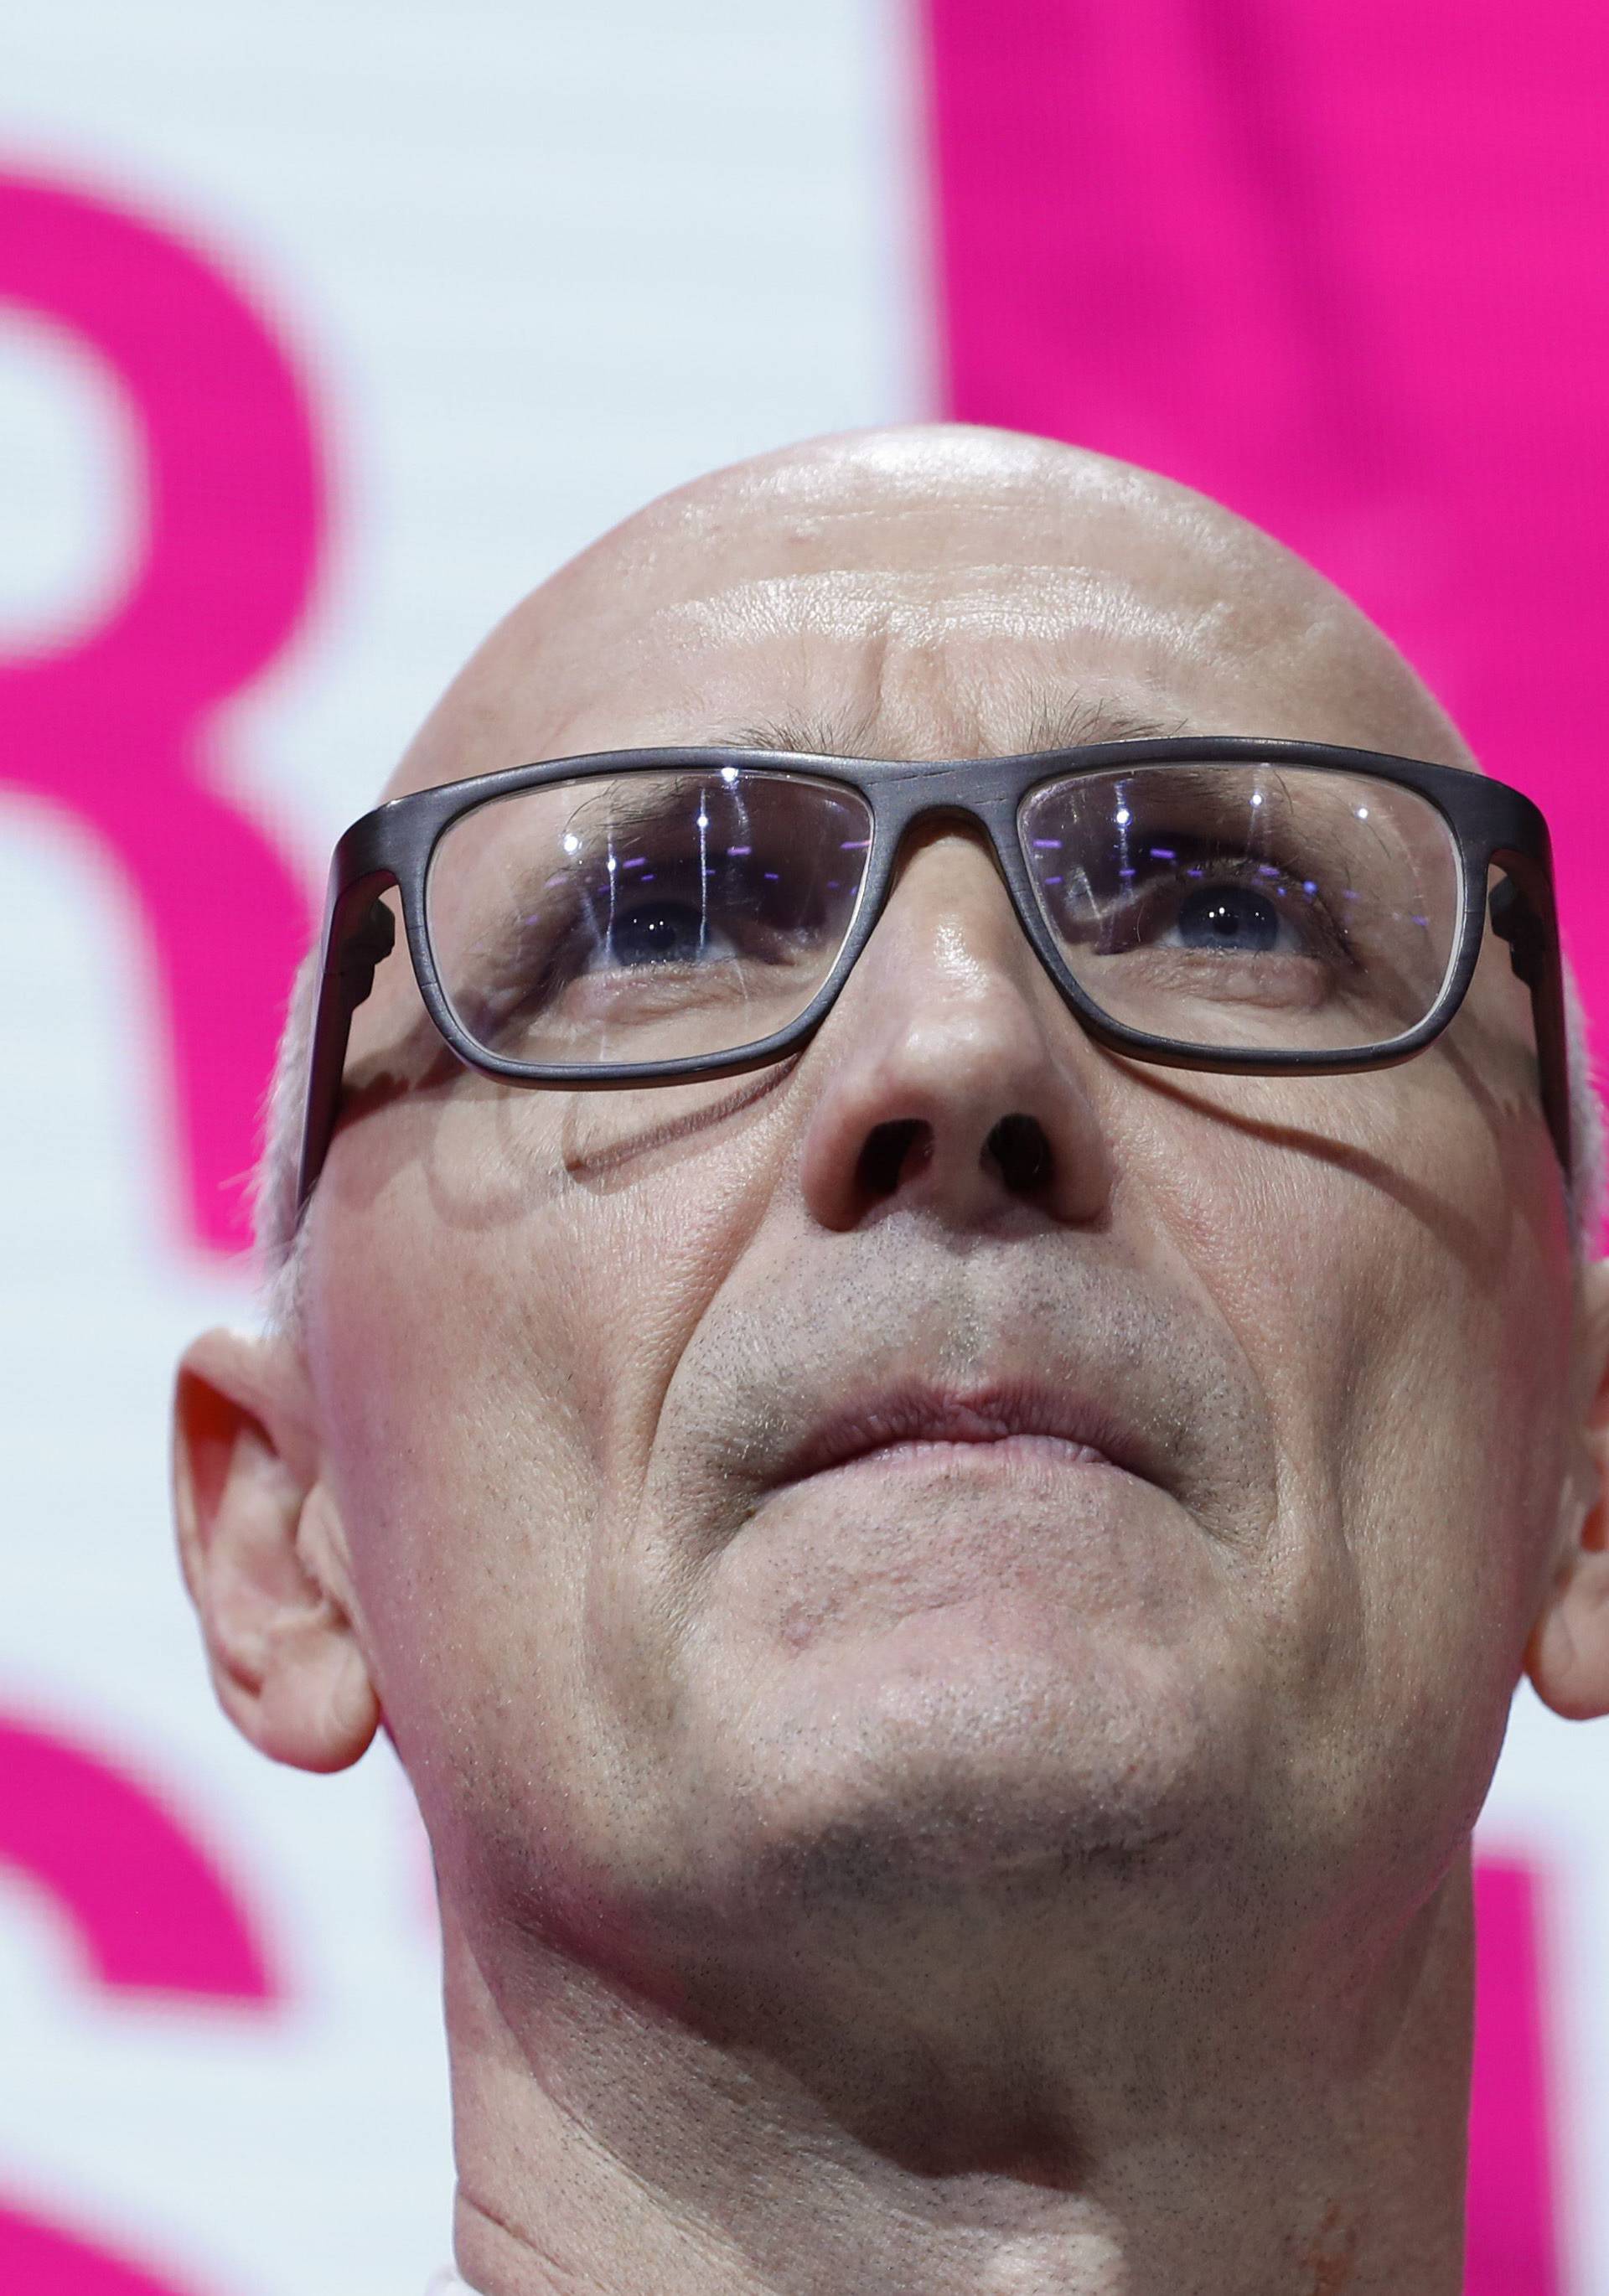 Deutsche Telekom Chief Executive Officer Tim Hoettges attends the Mobile World Congress in Barcelona